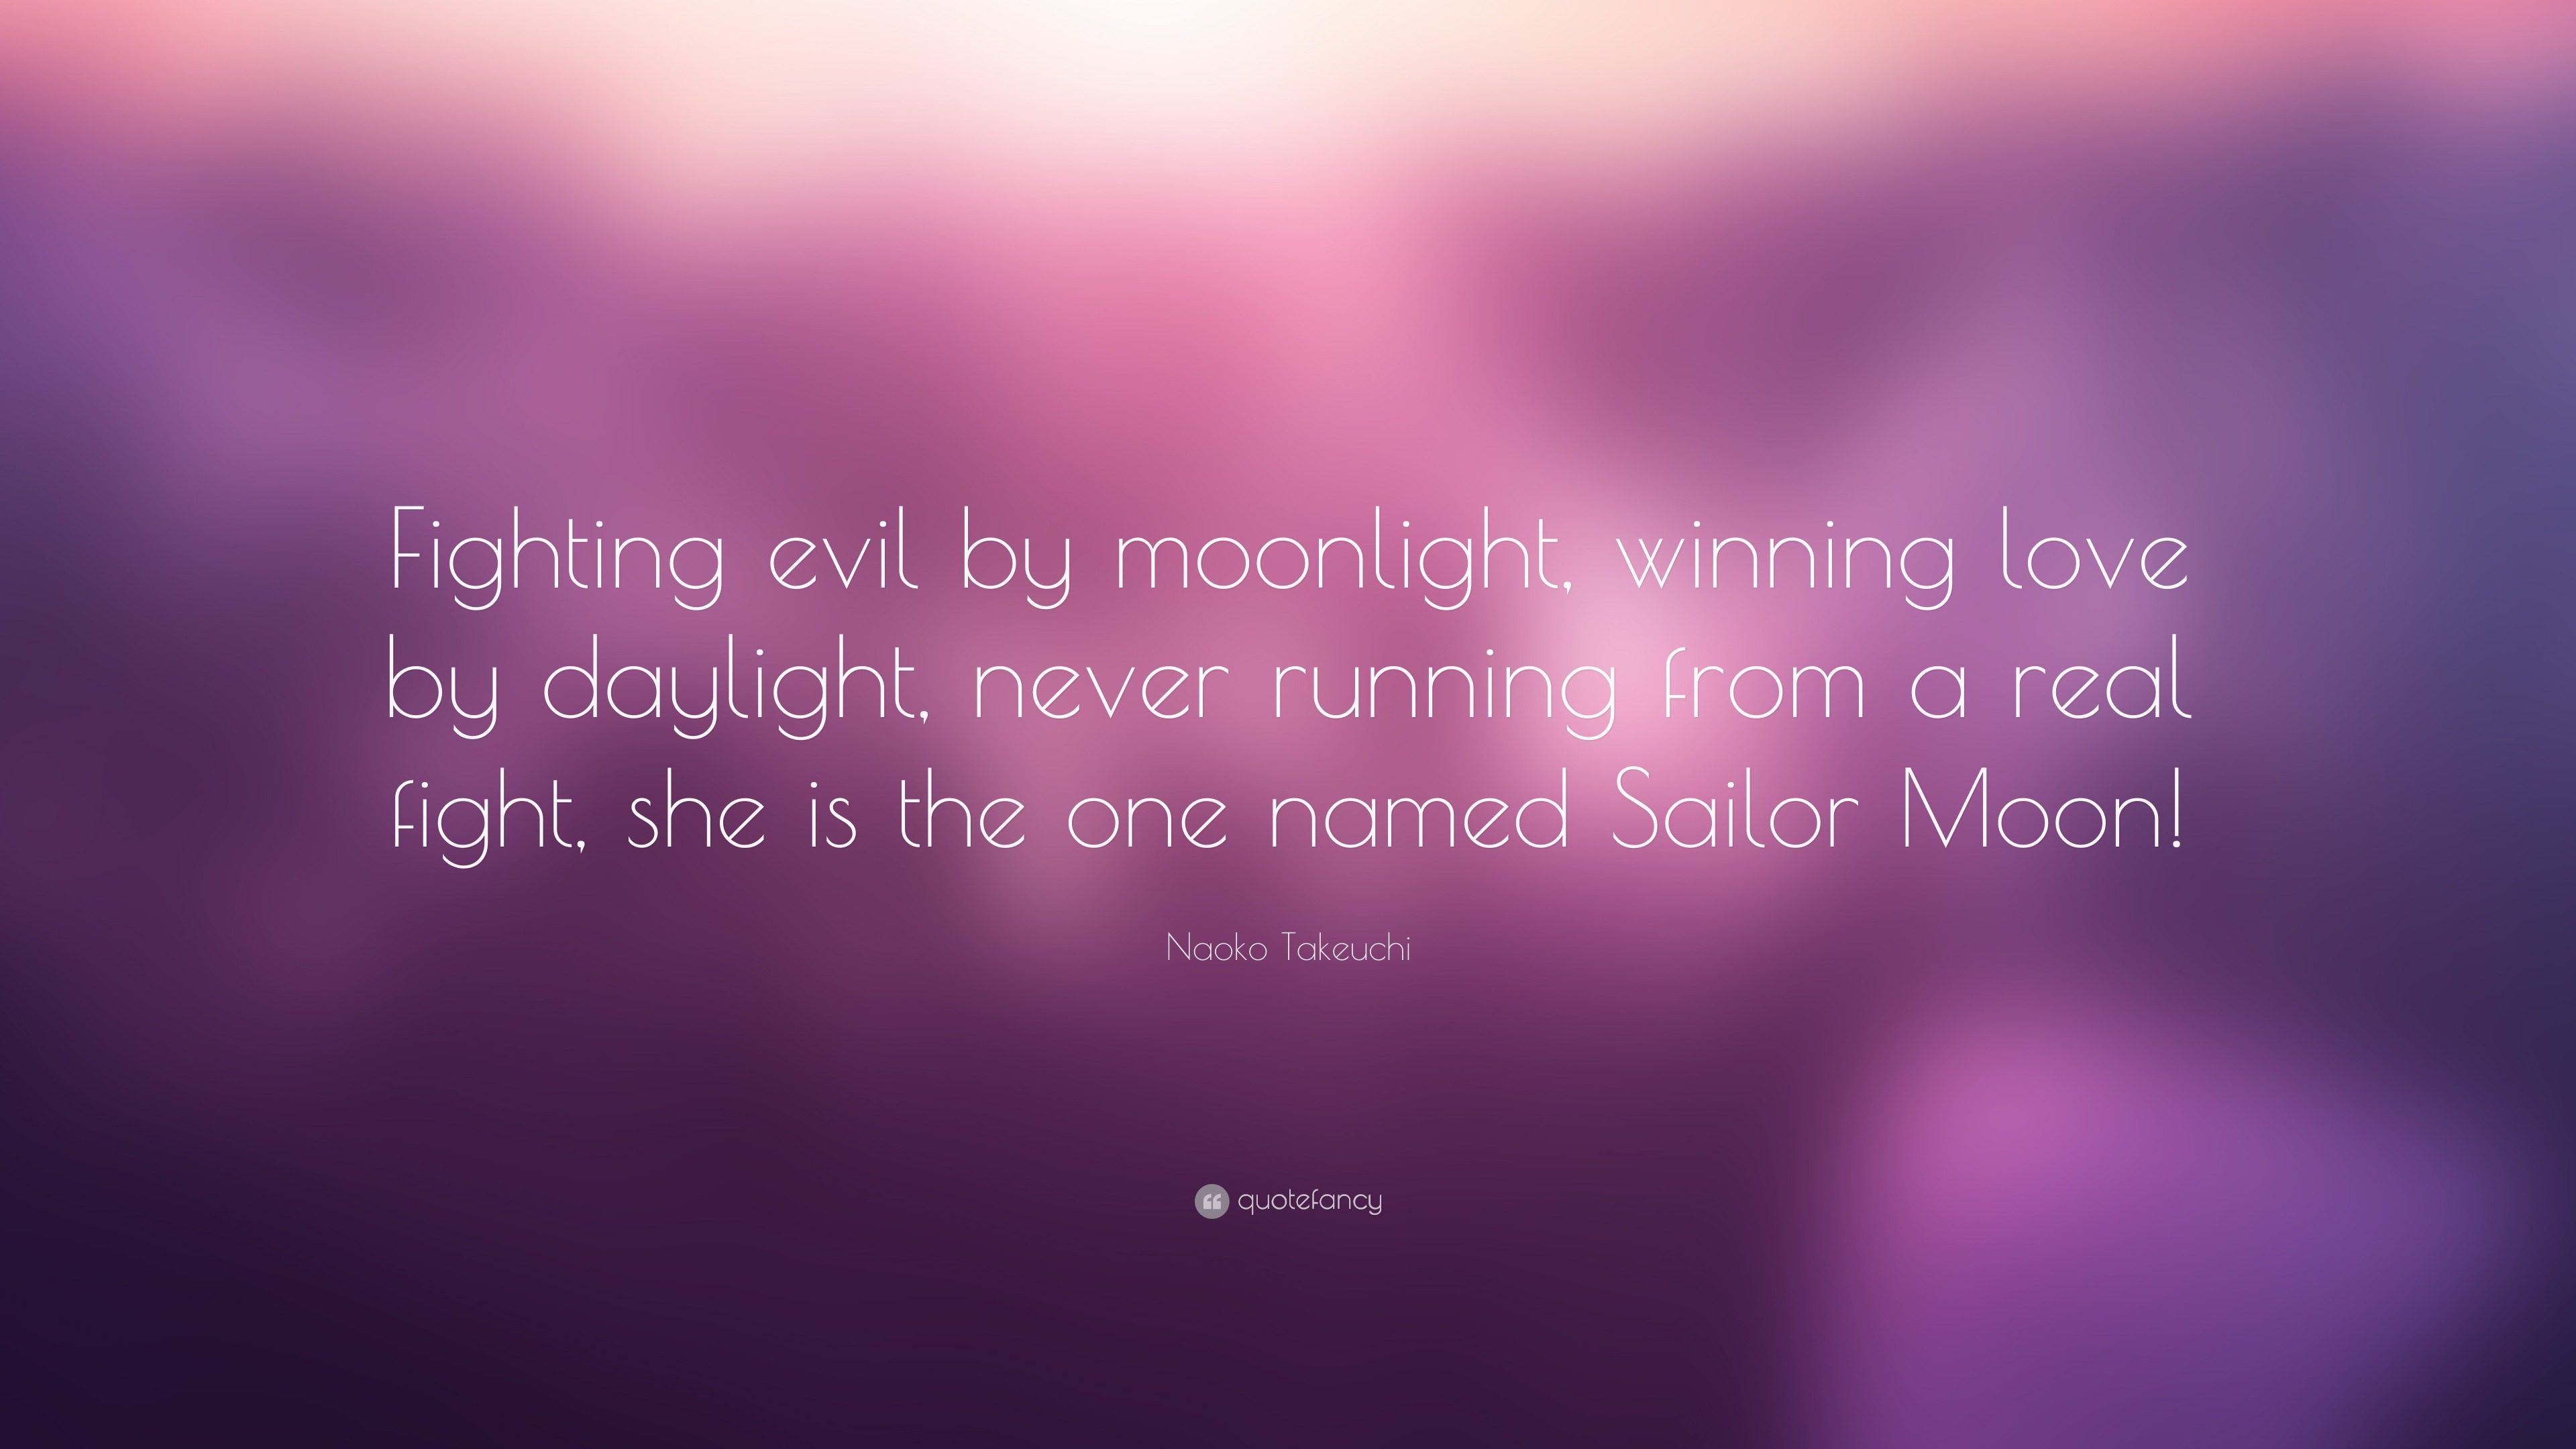 Naoko Takeuchi Quote “Fighting evil by moonlight winning love by daylight never